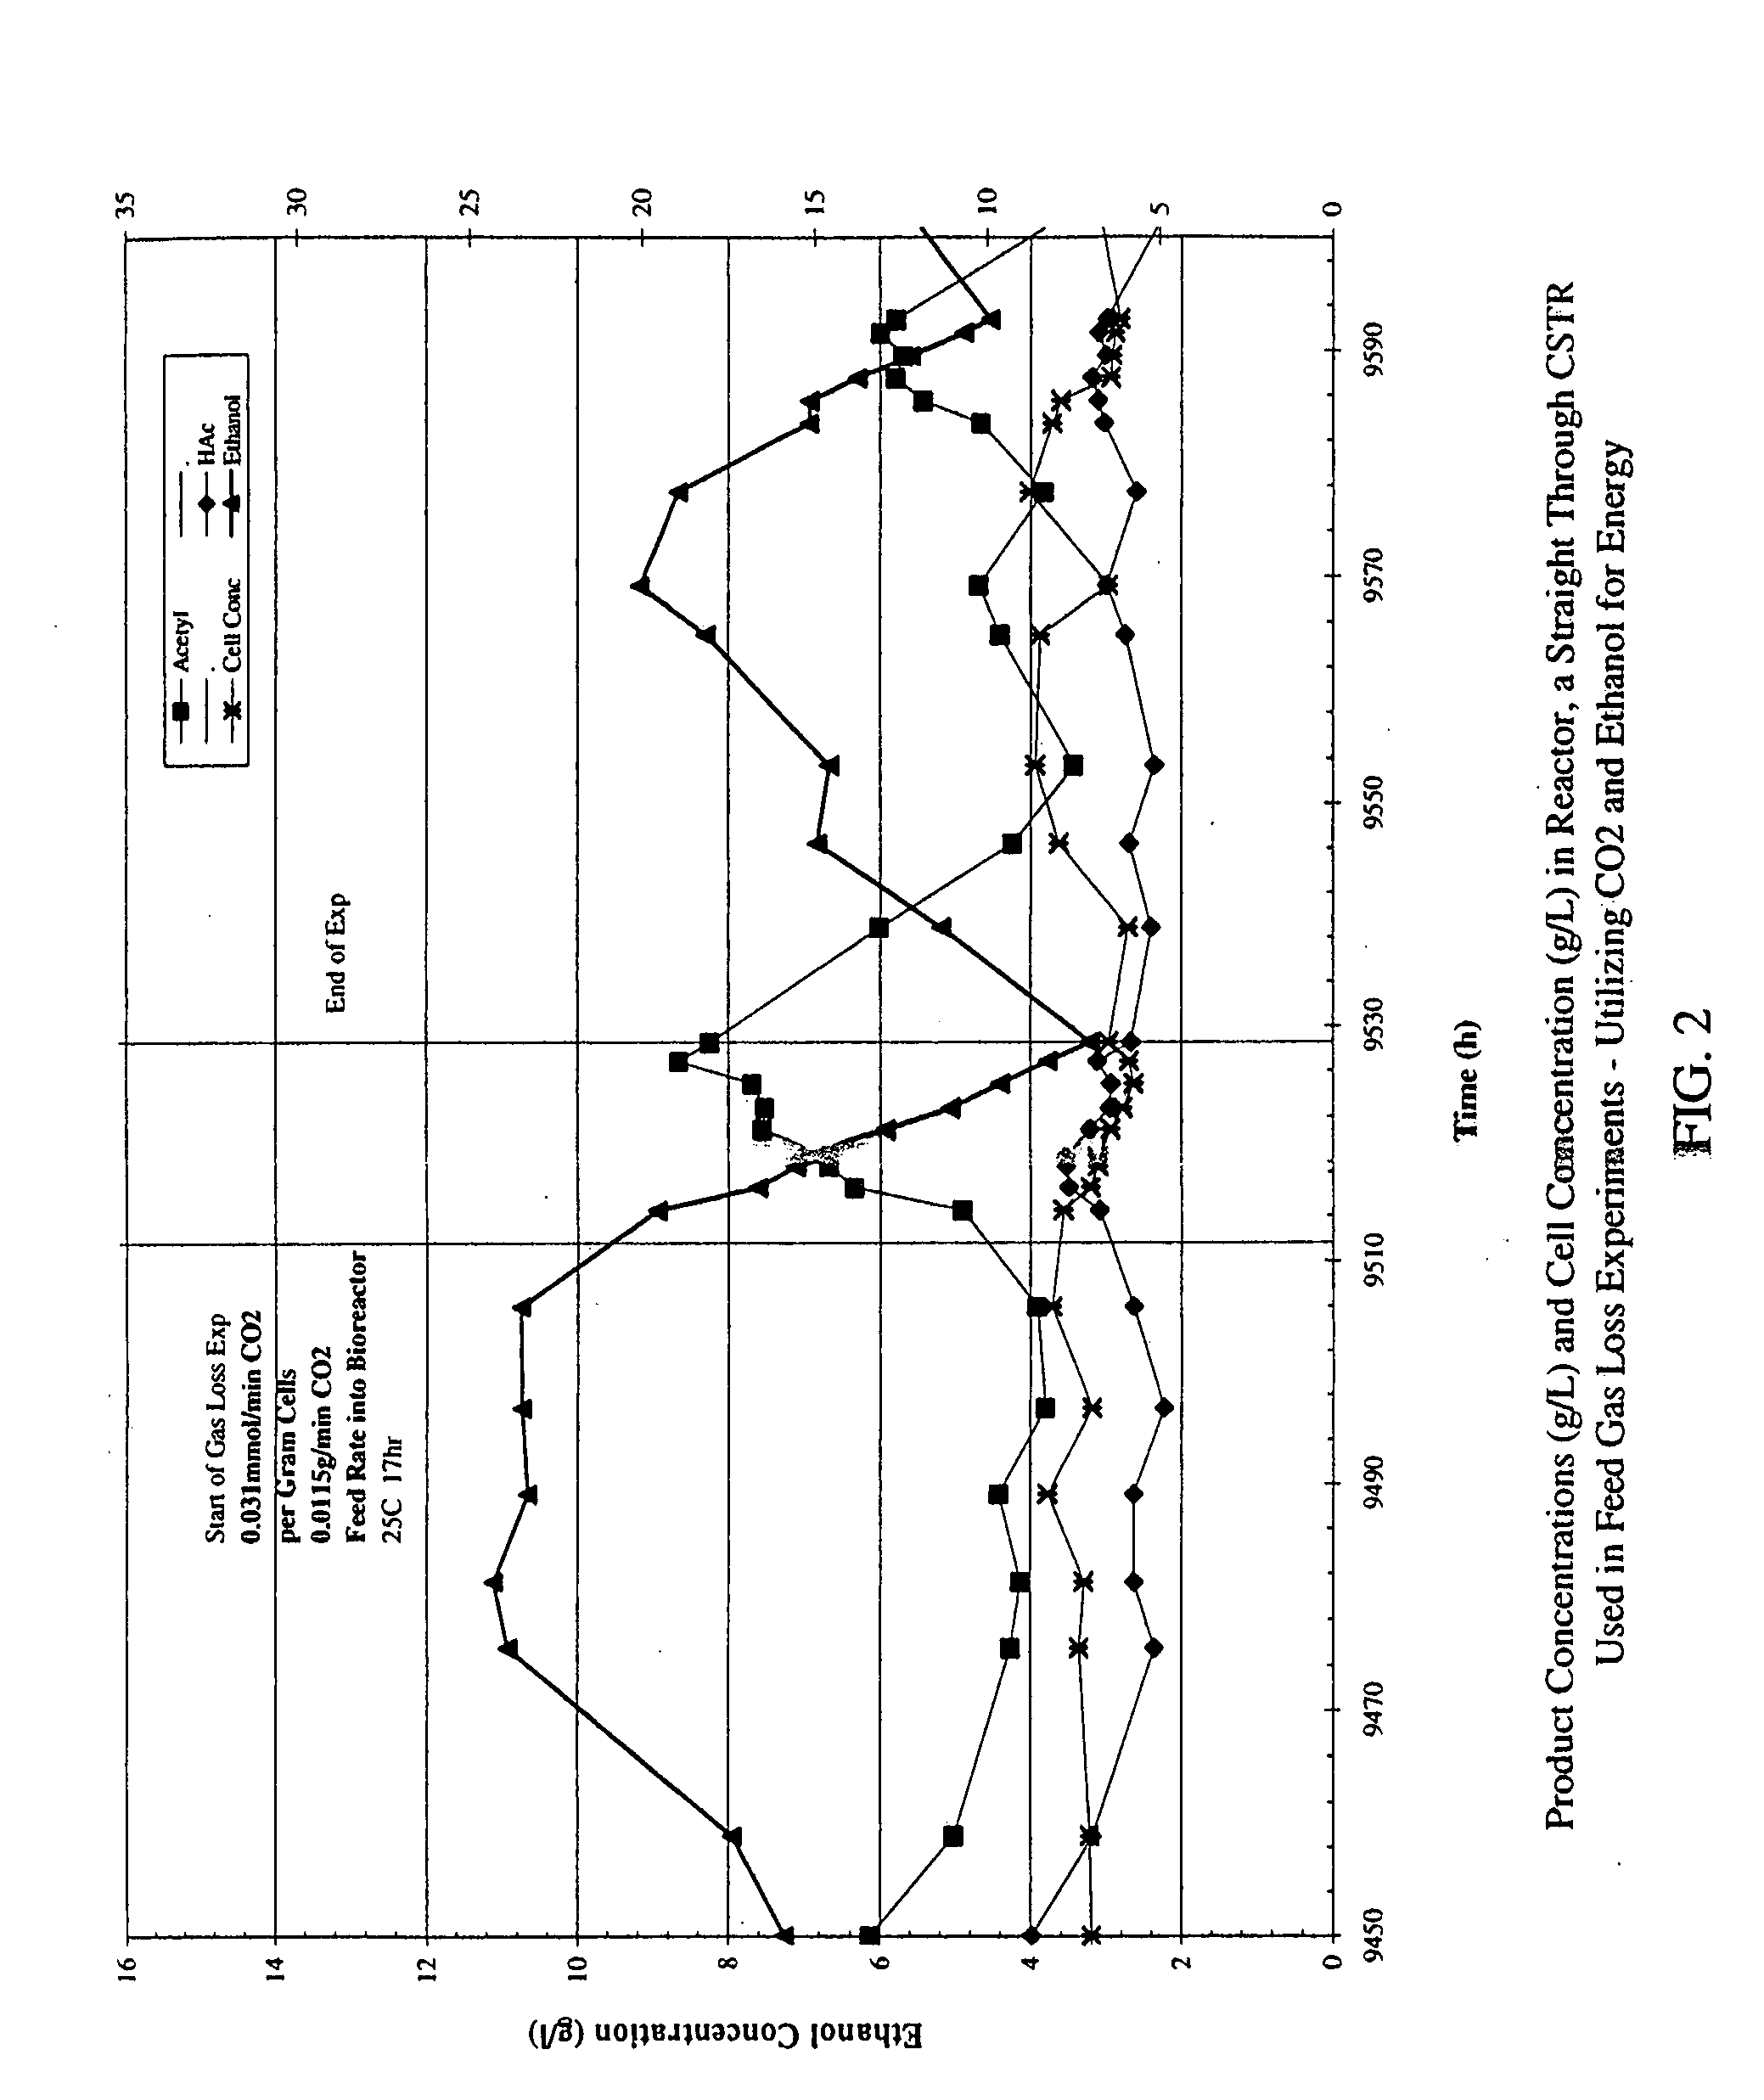 Method for sustaining Microorganism culture in Syngas fermentation process in decreased concentration or absence of various substrates